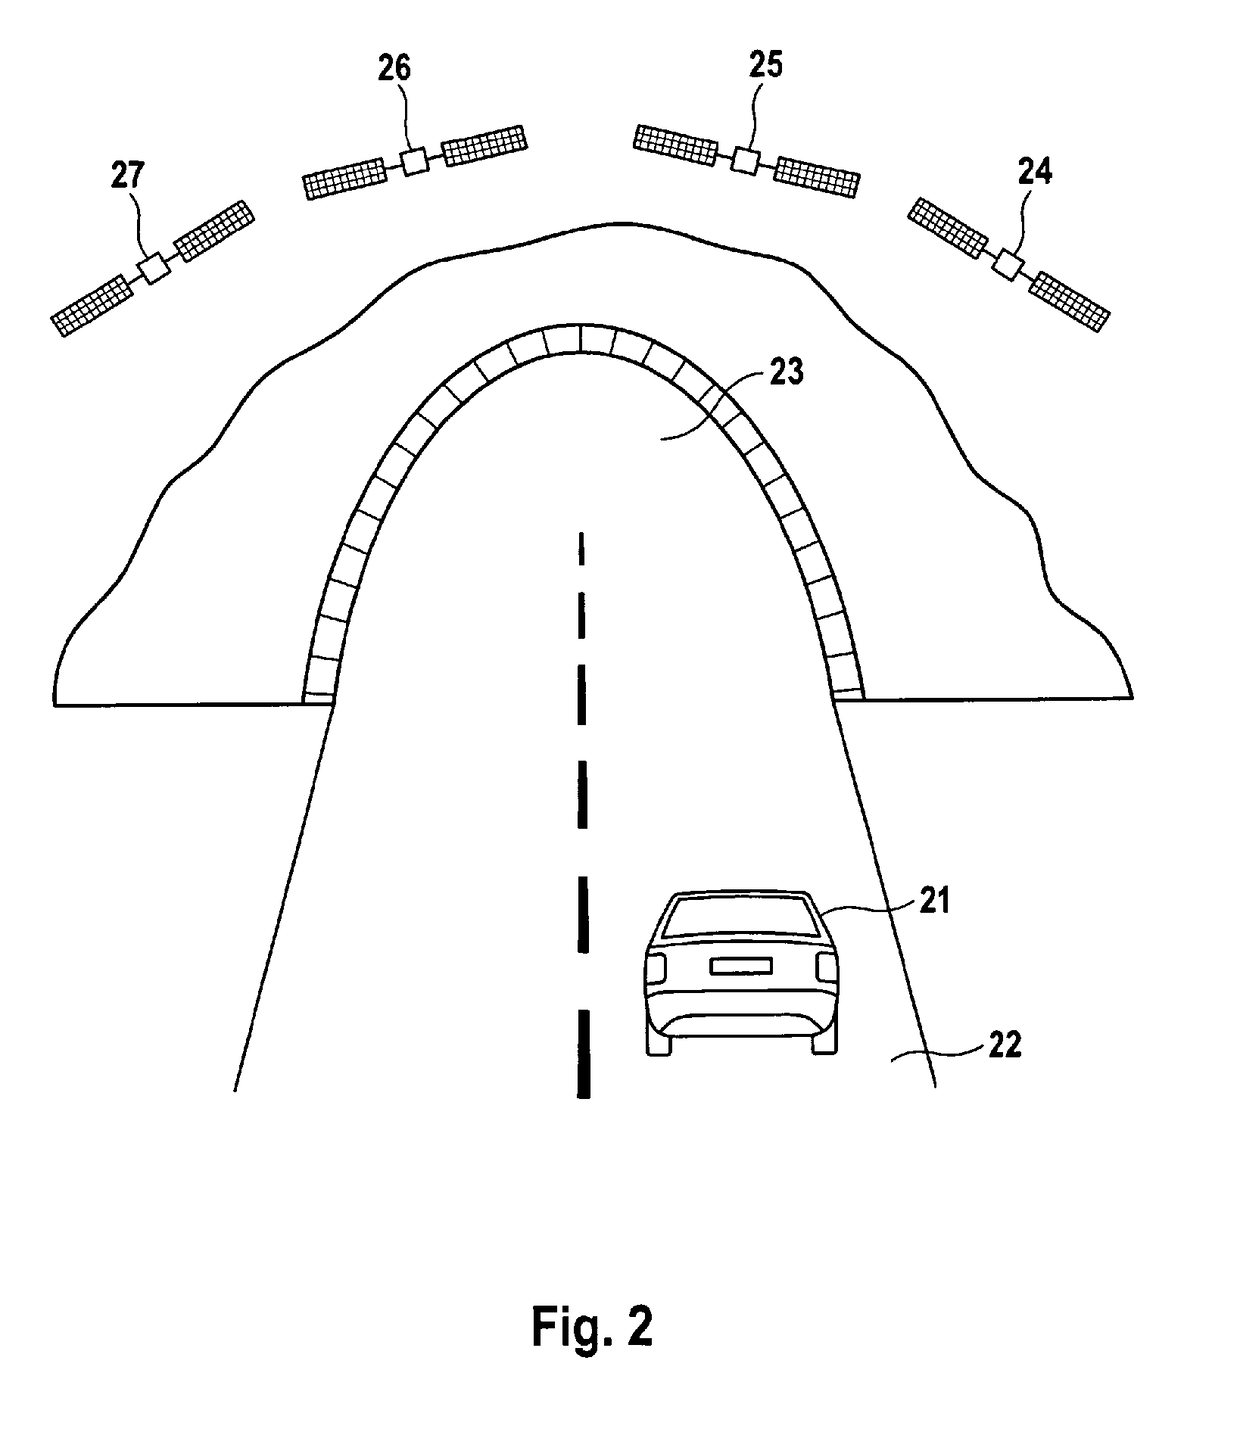 Location-determining device in a motor vehicle and information merging method